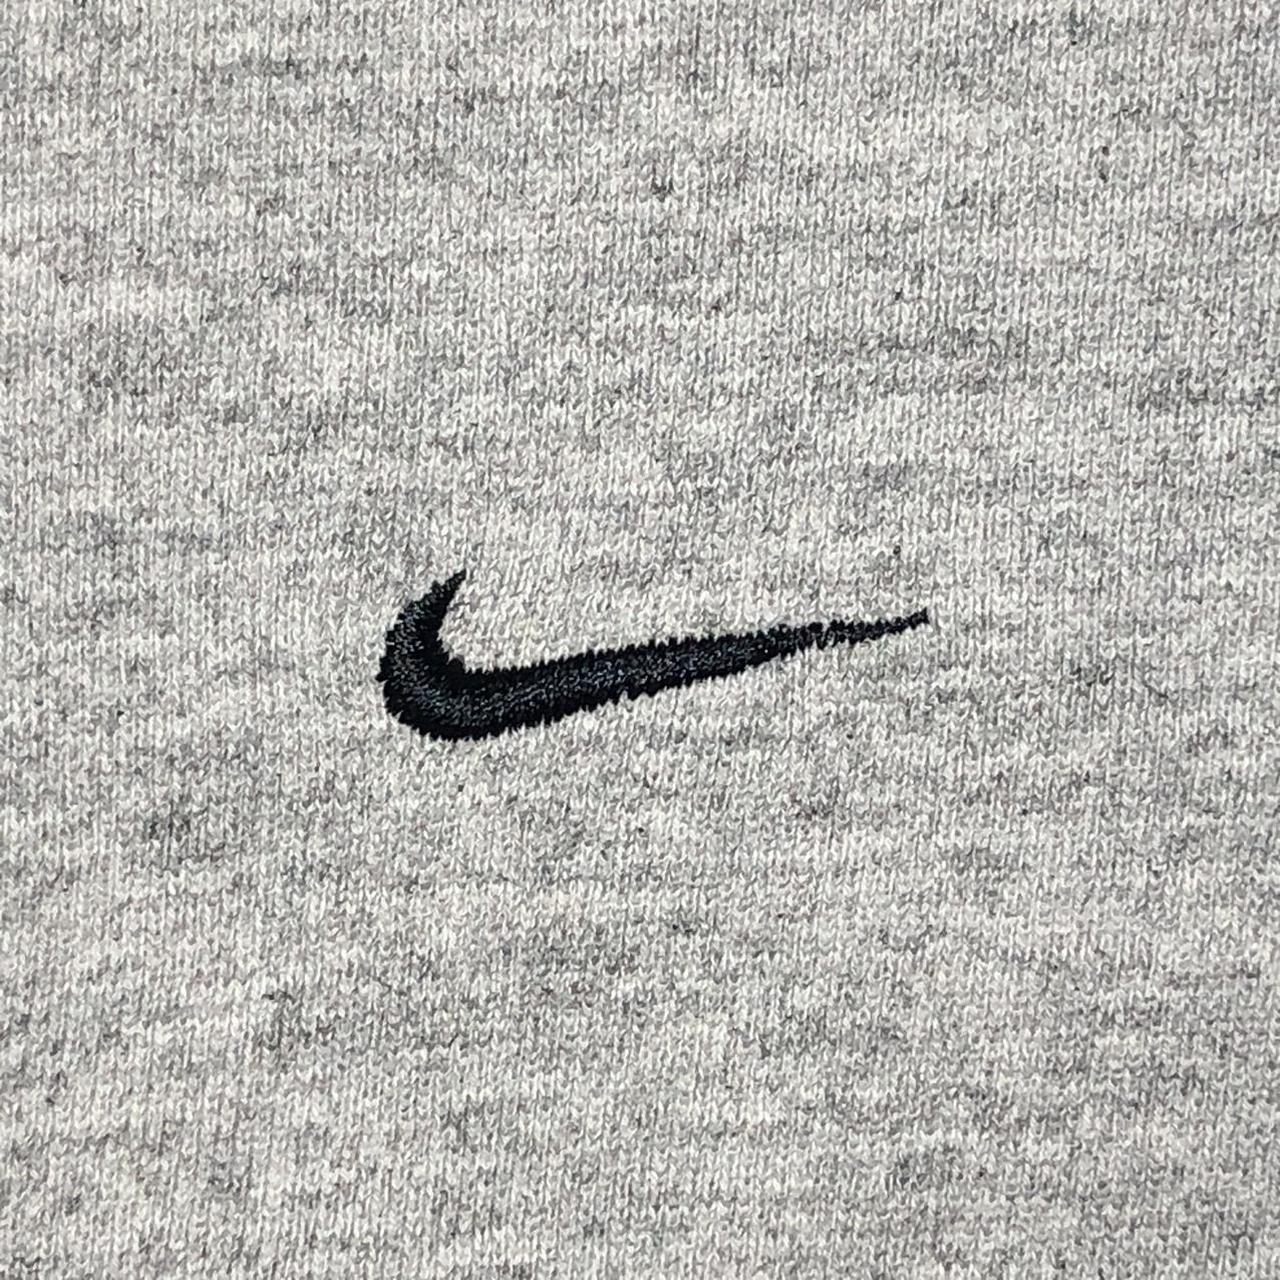 Product Image 2 - Nike Embroidered Logo Crewneck
Dated: 2000s

-embroidered